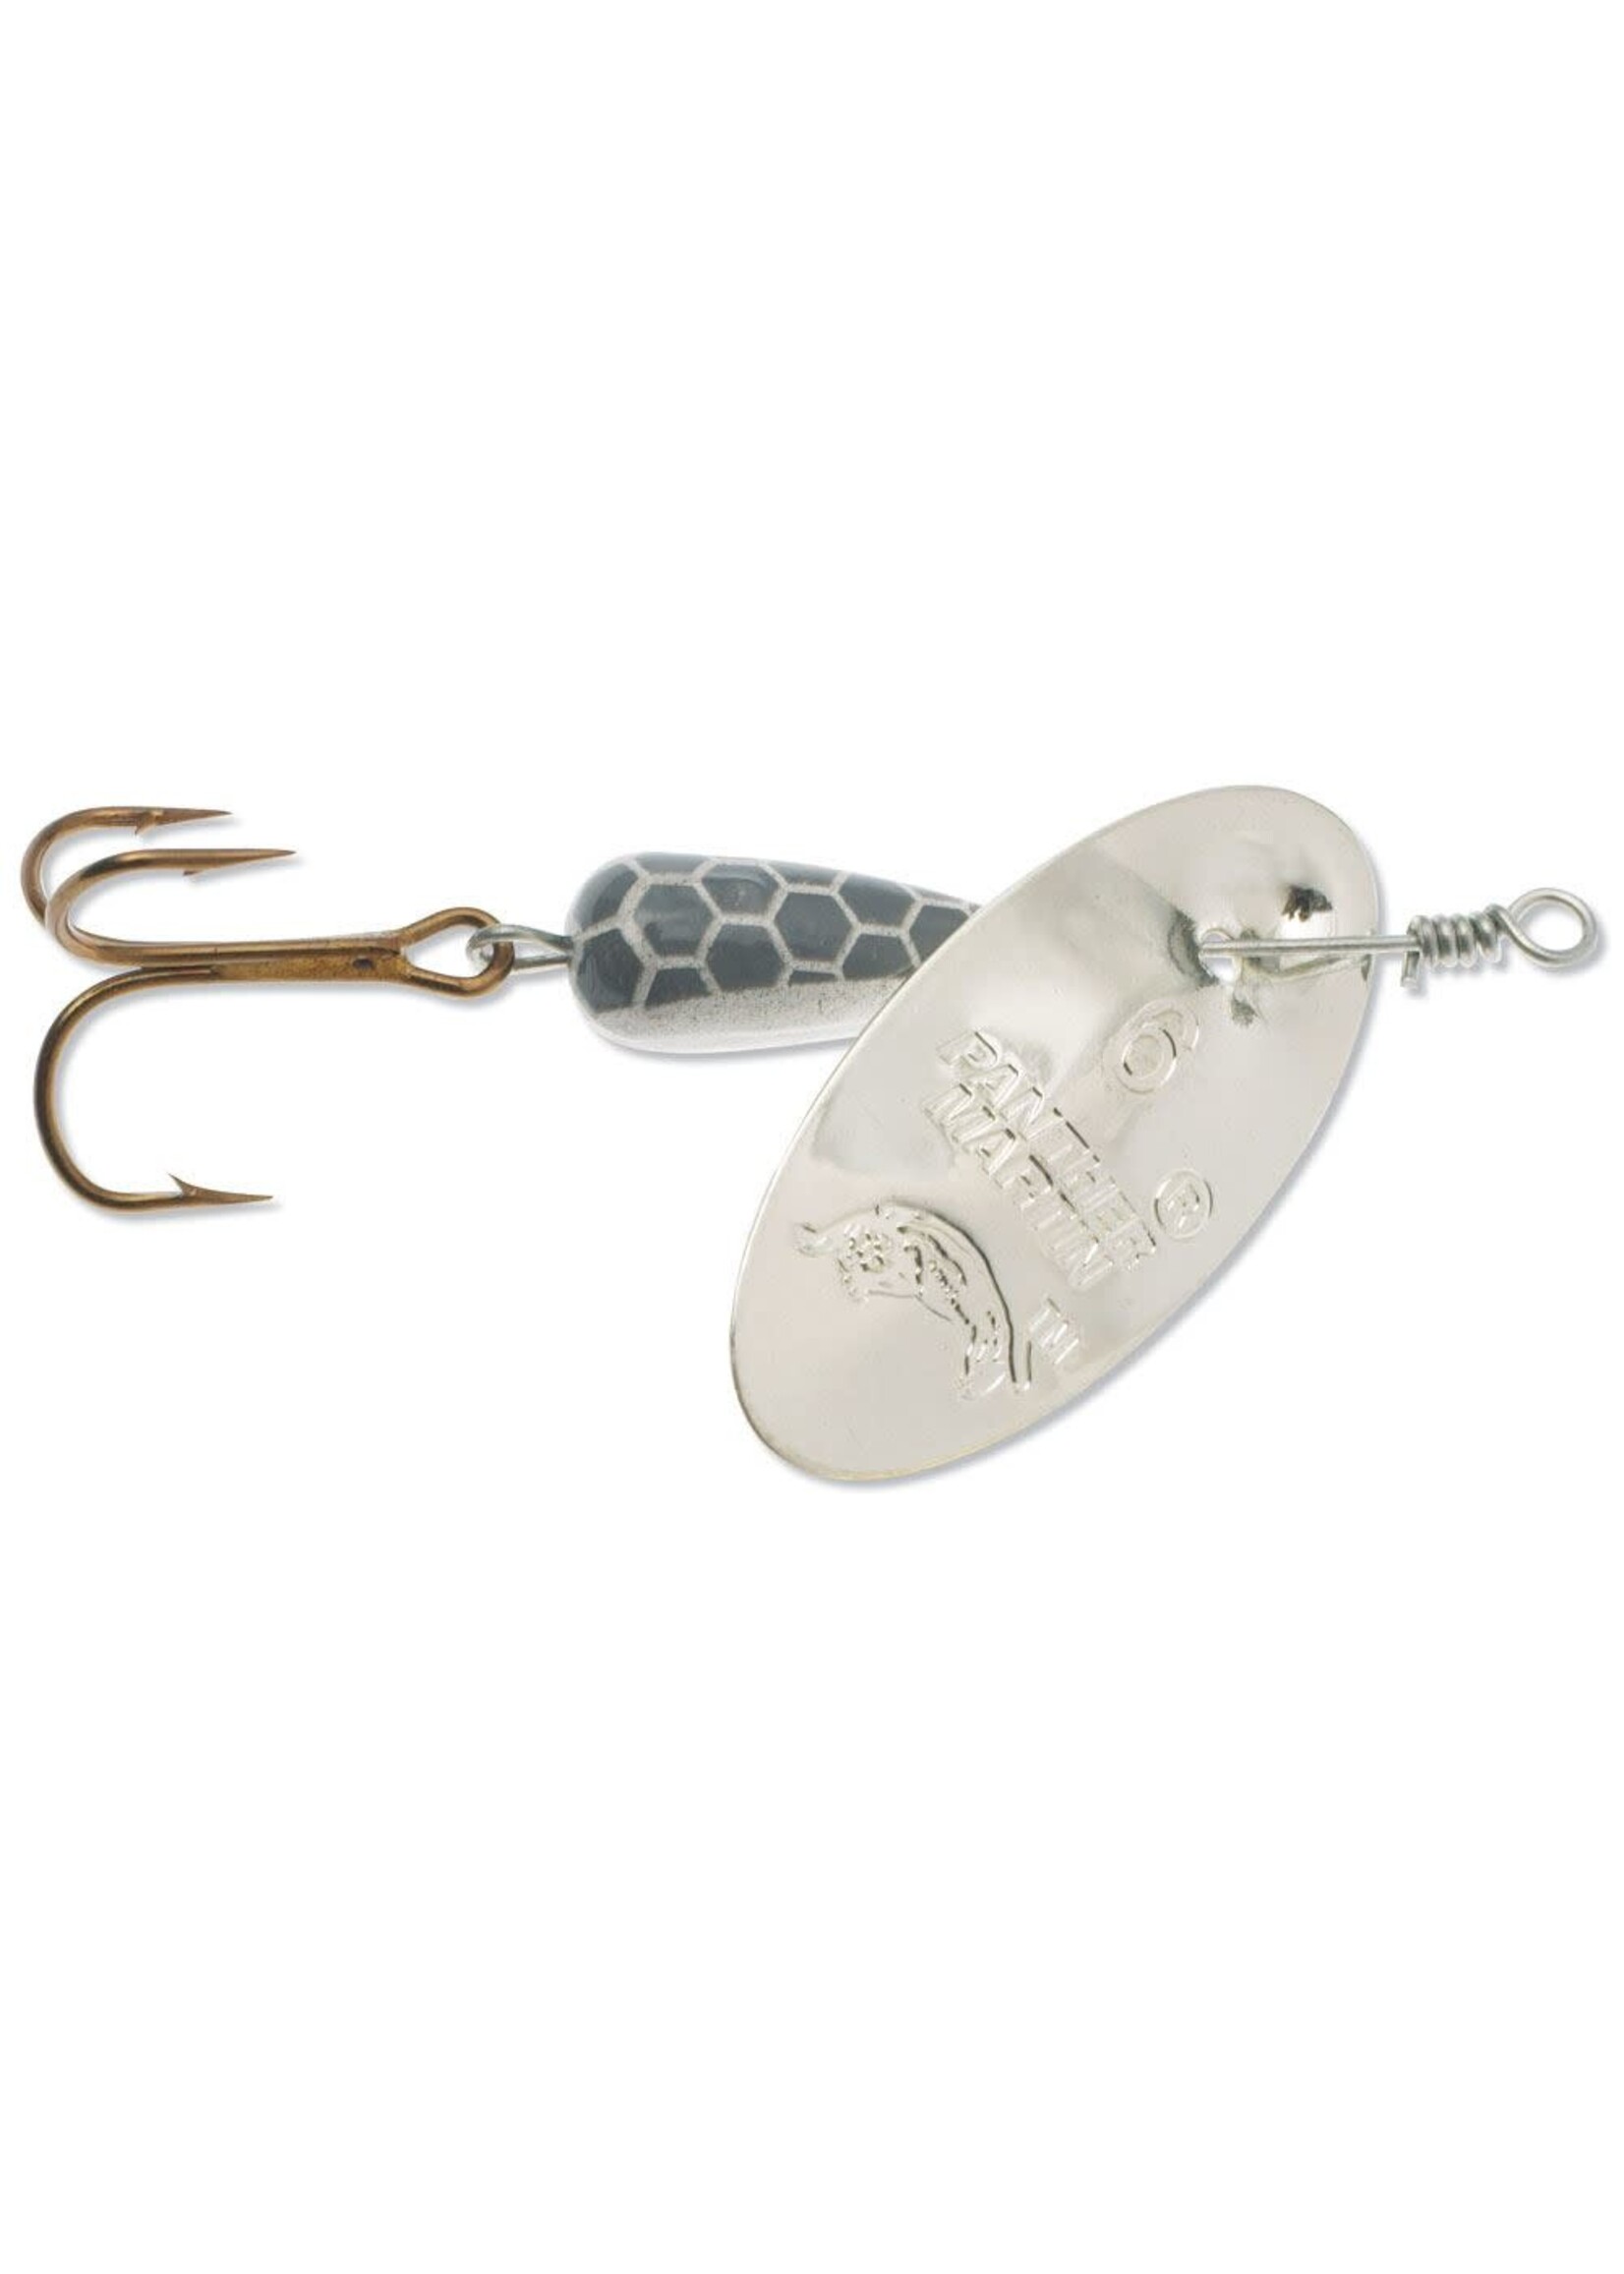 Panther Martin Nature Series Spinners - Tackle Shack